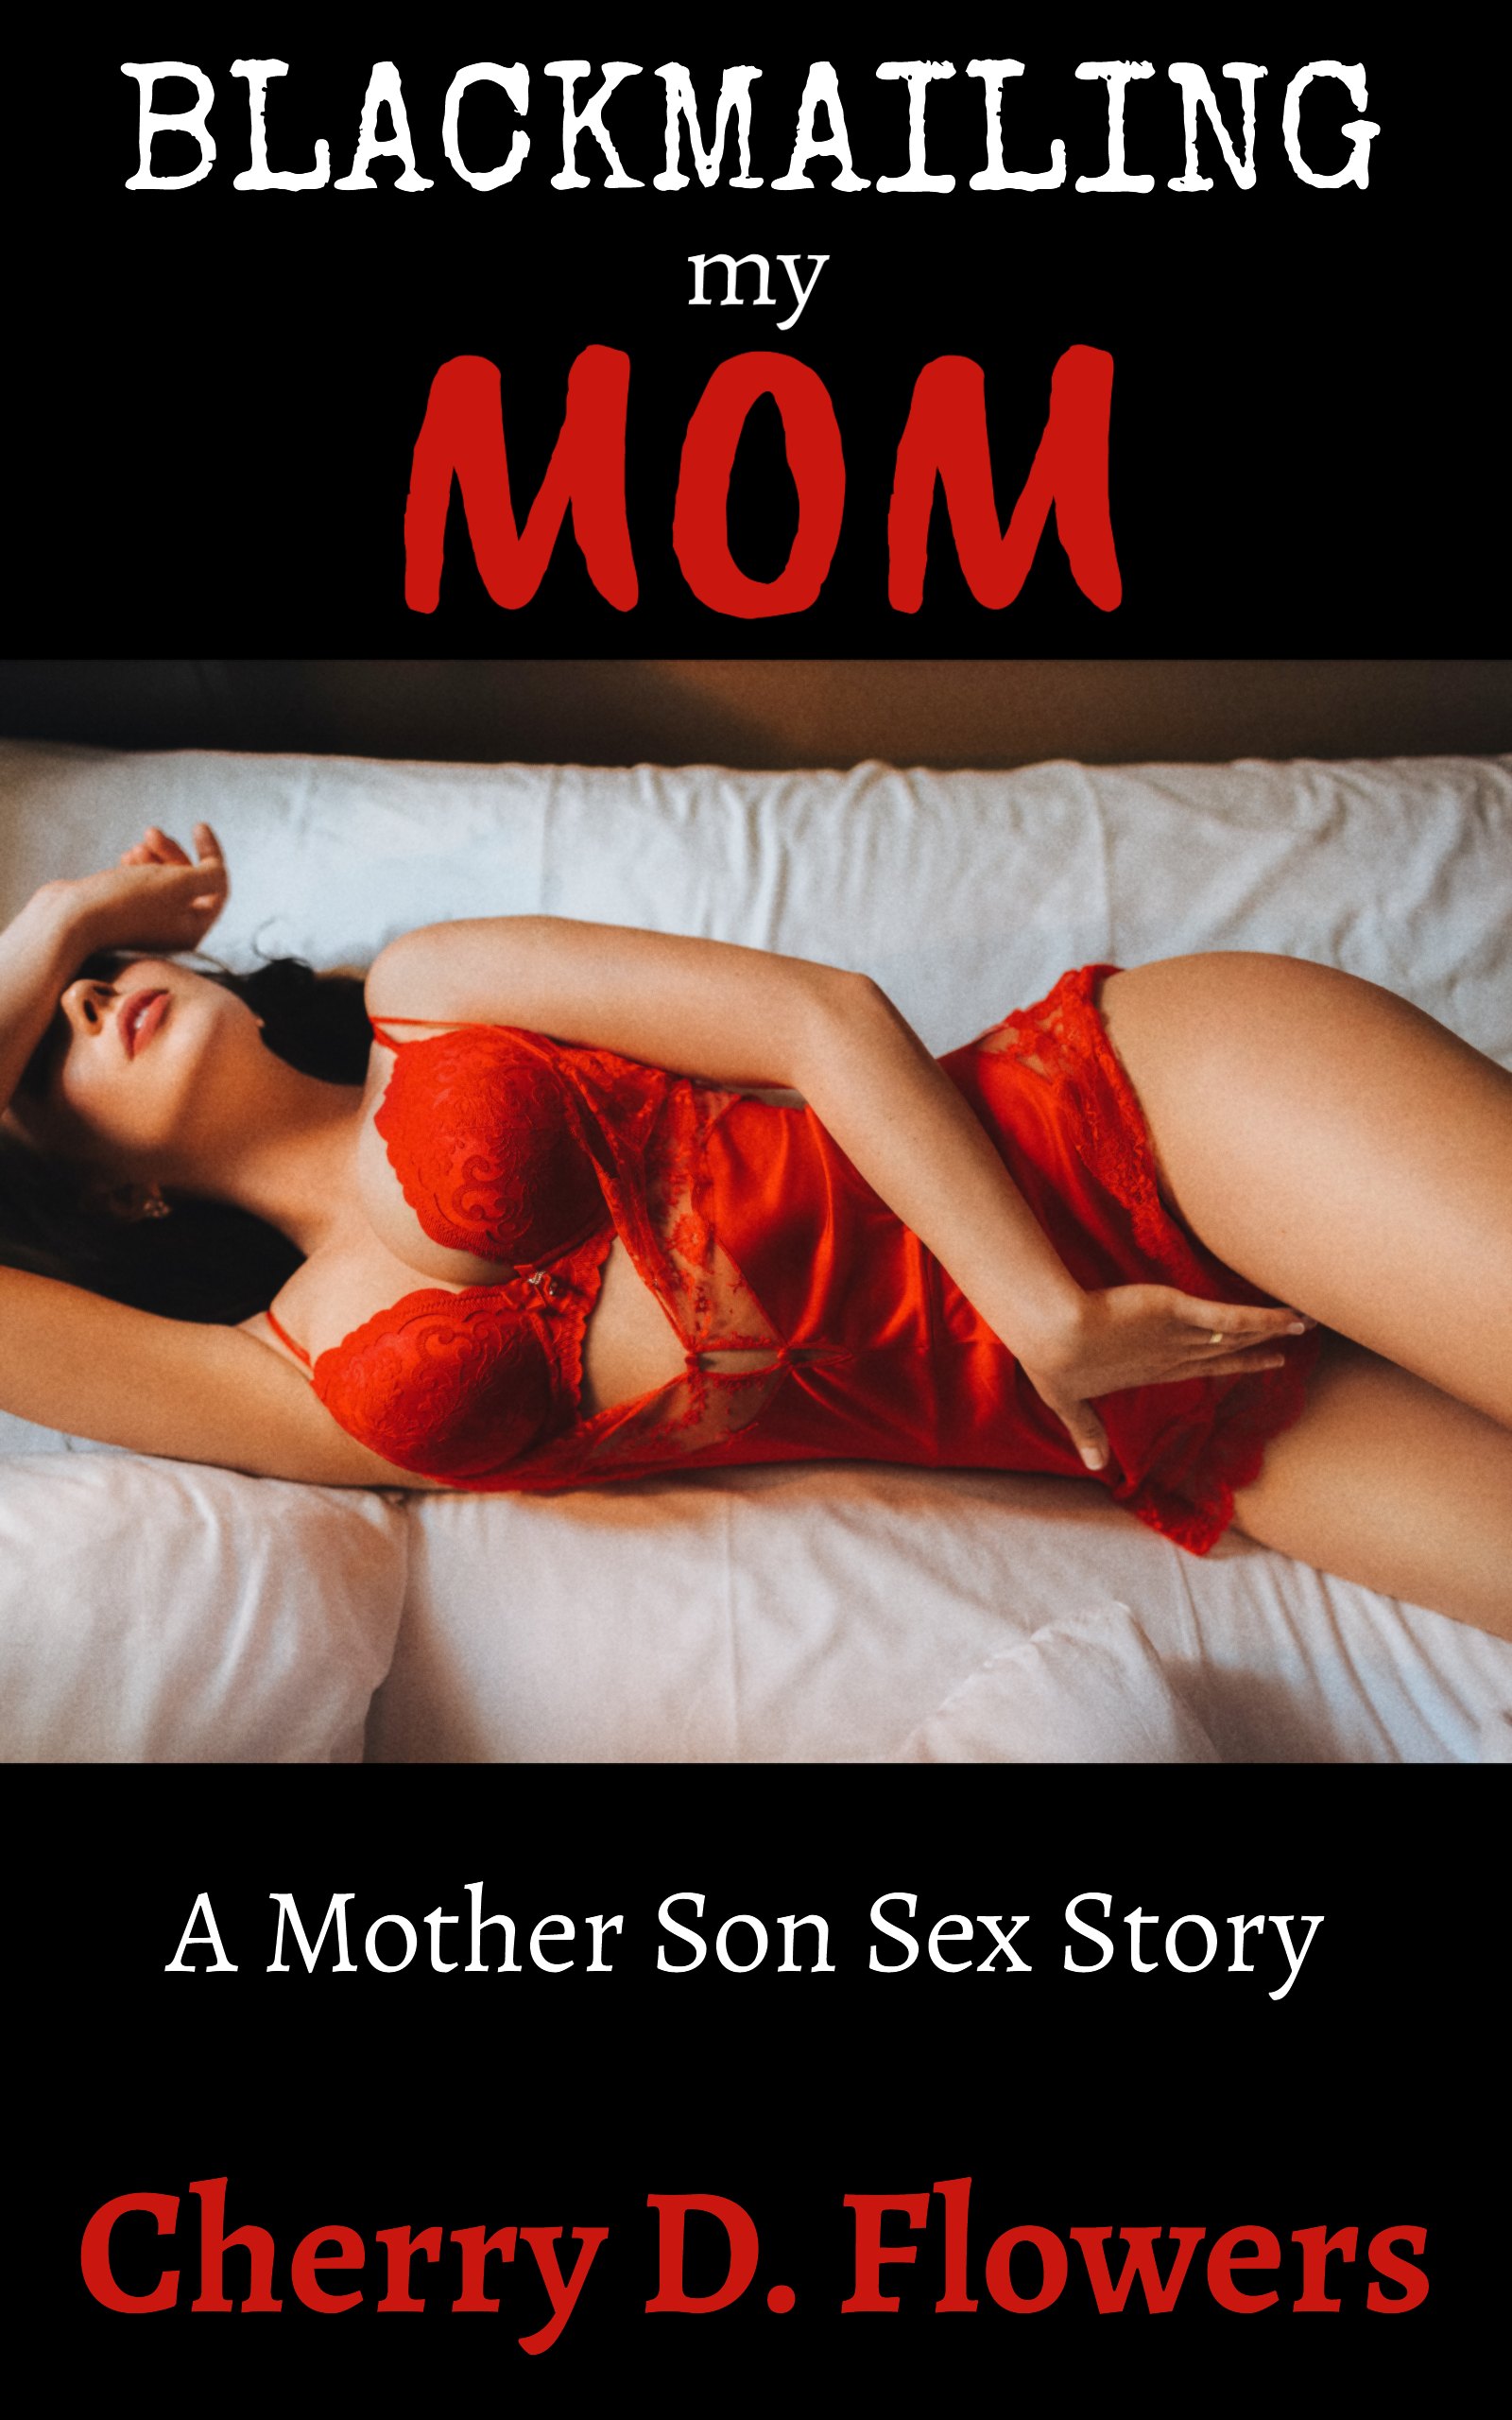 Son erotic story mom Mother Accidentally